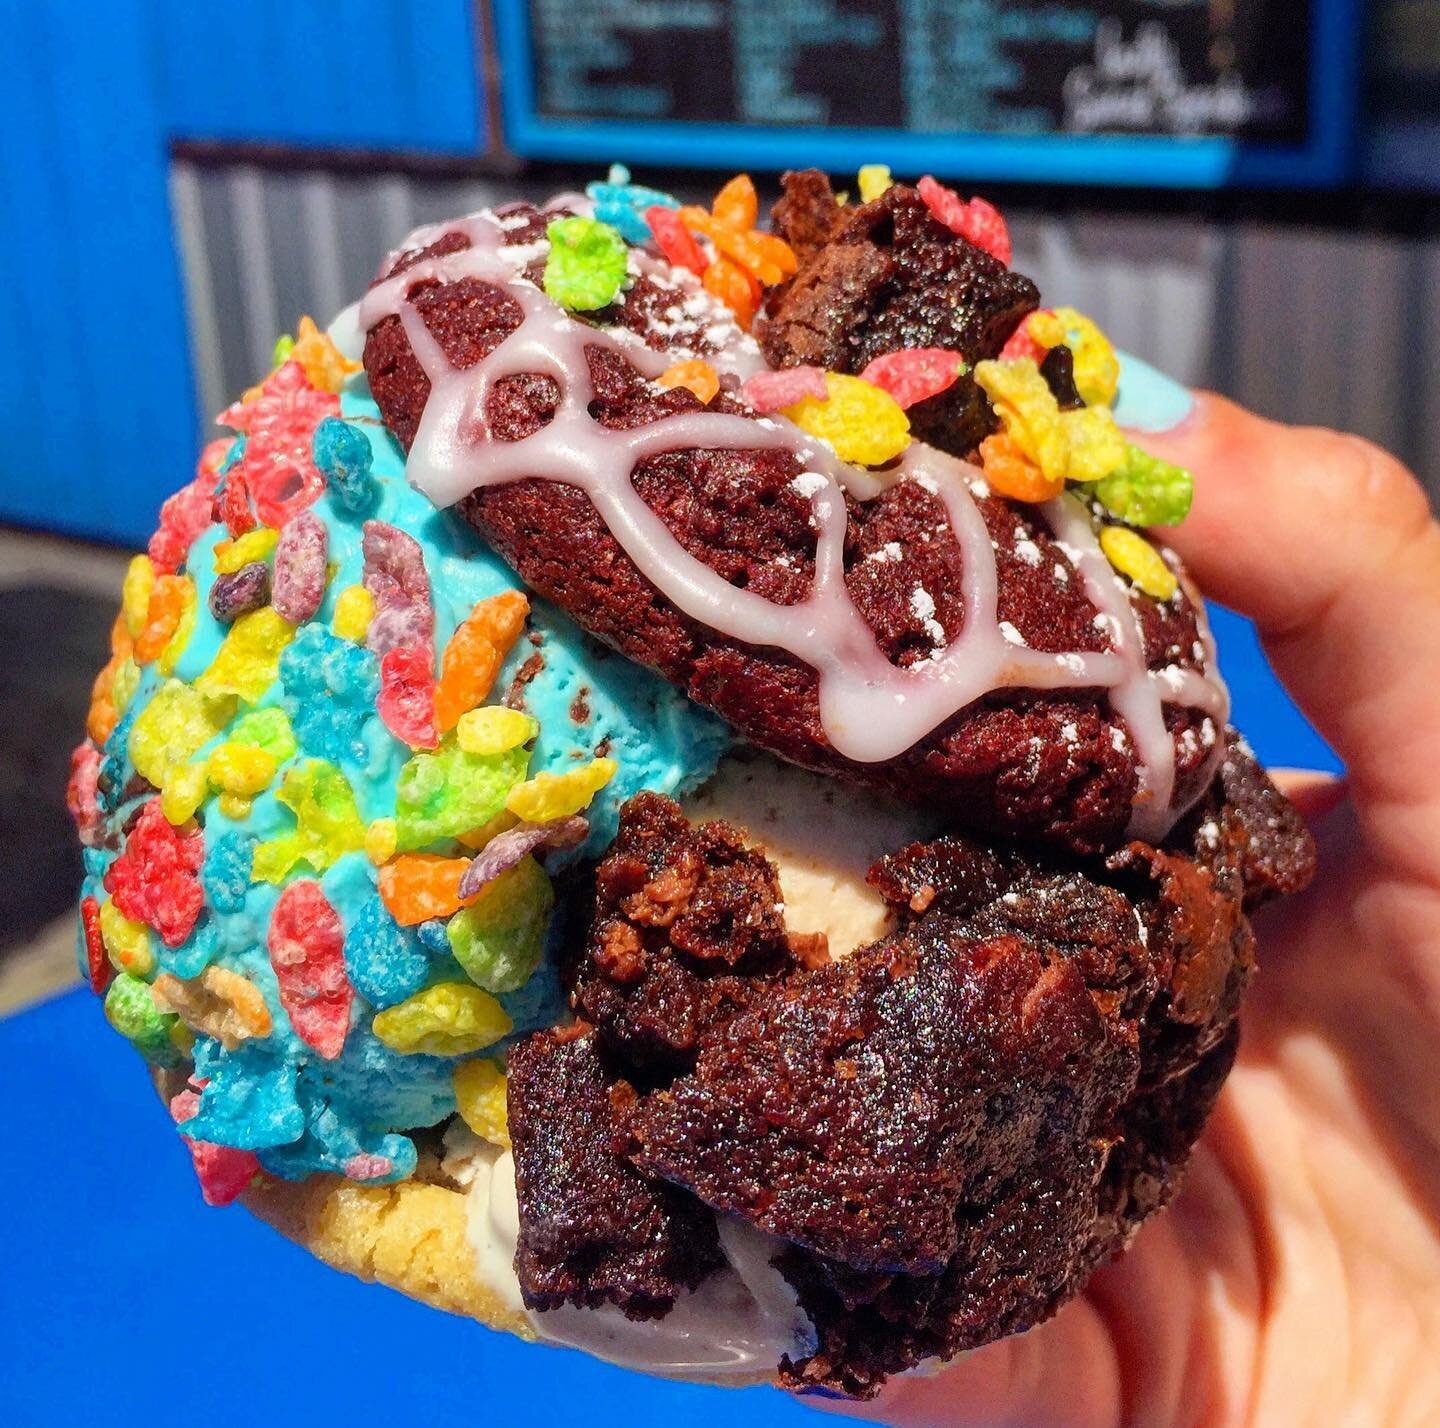 CRAZY LOADED &amp; DELICIOUS ICE CREAM SANDWICH 🍦 from @thebakedbear in San Francisco! Ohhh the things I would do to have it again 🤤